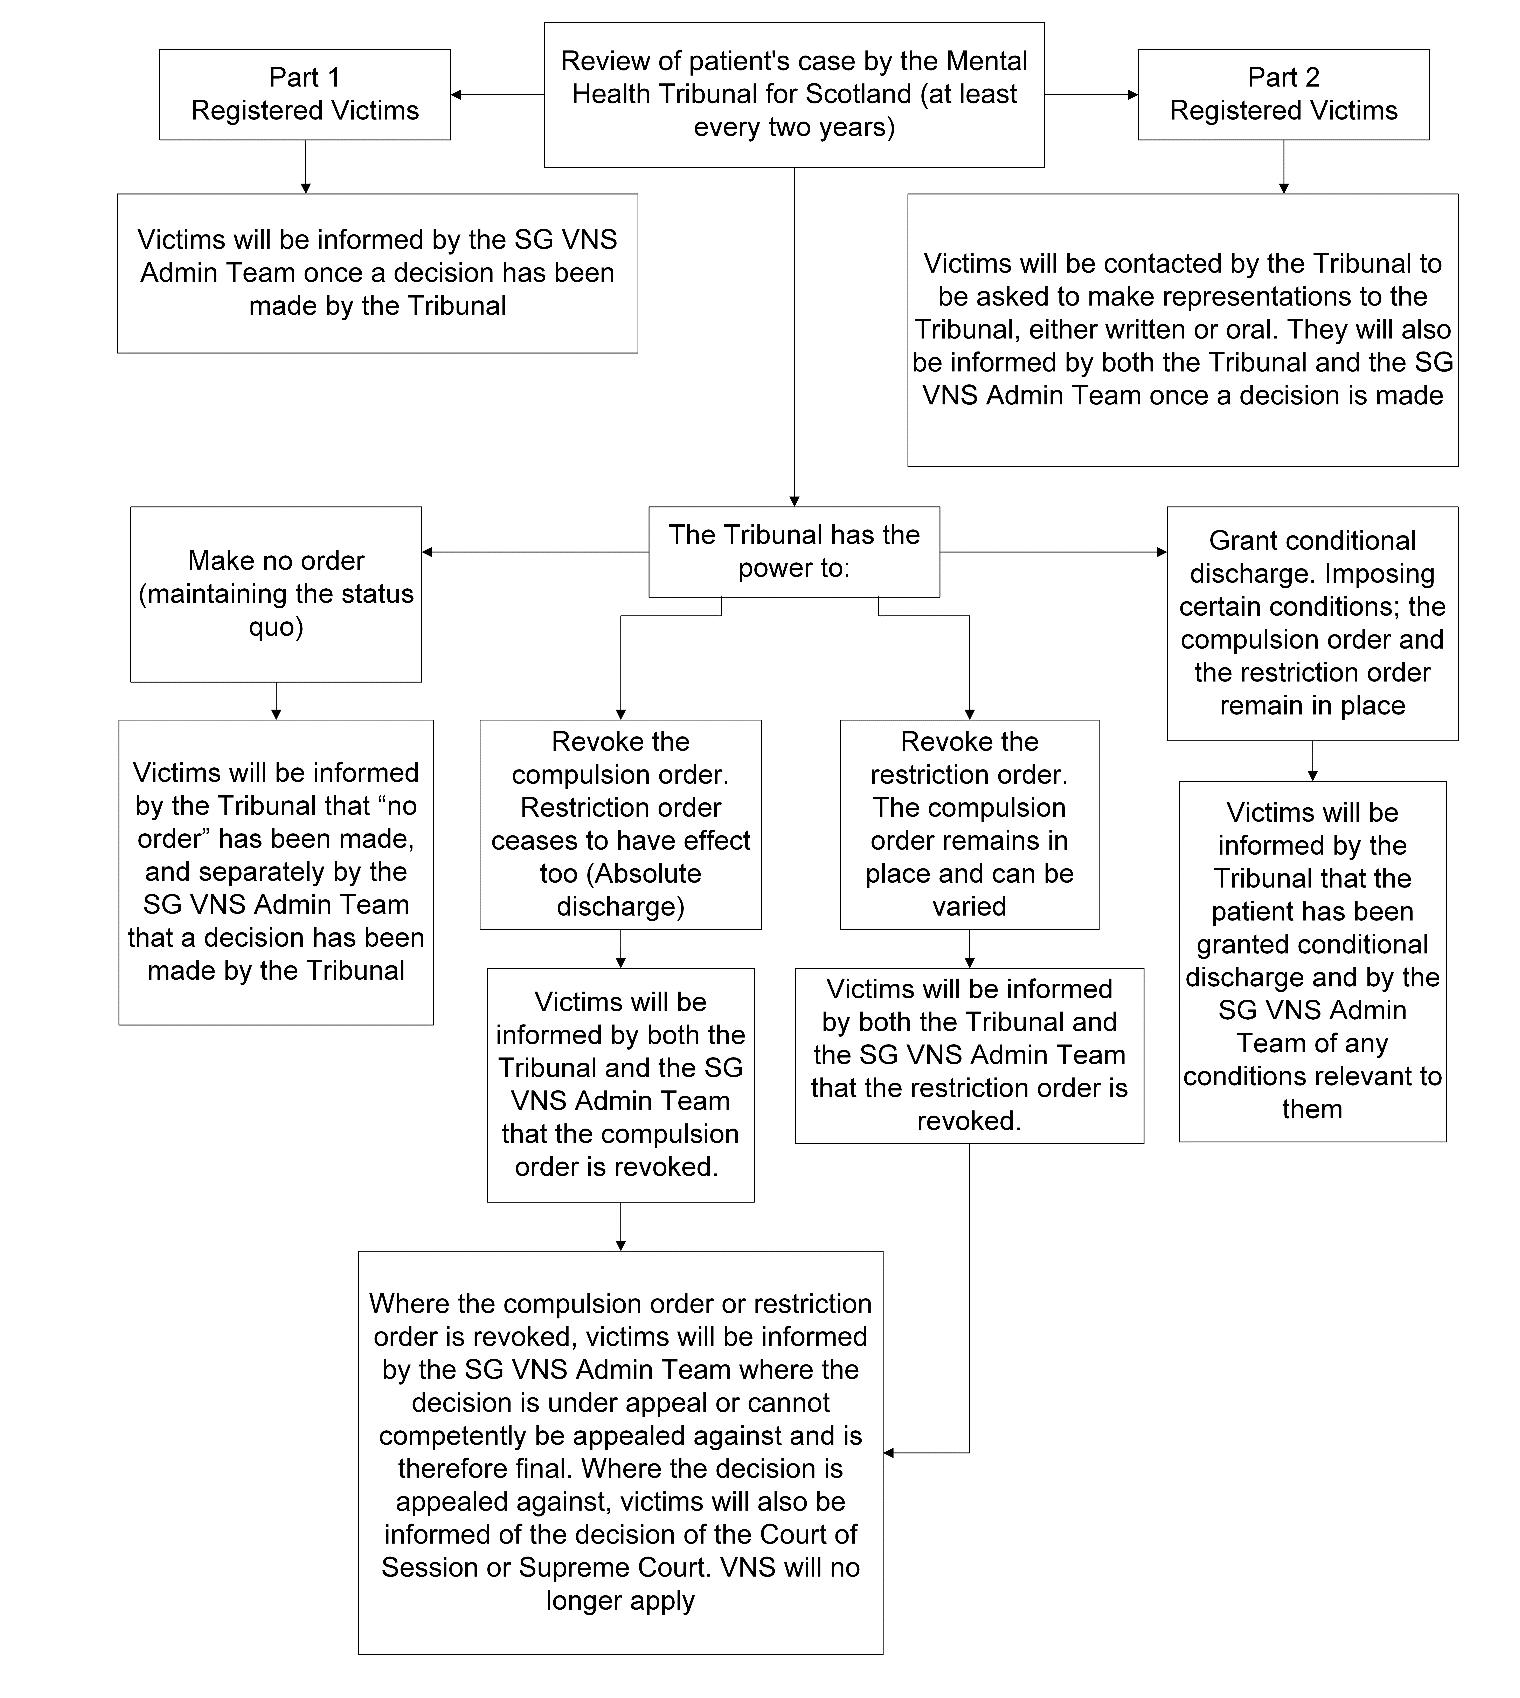 This is a process map for operation of the CORO VNS when the MHTS reviews the case. 
The Mental Health Tribunal for Scotland will review a patient’s case at least every two years.
If a victim is registered for Part 1, the SG VNS Admin Team will tell them once a decision is made by the Tribunal. 
If a victim is register for Part 2, the victim will be contacted by the Tribunal to be asked to make representations to the Tribunal (either oral or written). The victim will also be told by both the Tribunal and the SG VNS Admin Team once a decision is made by the Tribunal. 
The Tribunal has the power to make various decisions. 
If the Tribunal decides to make no order (e.g. maintain the status quo) the victim will be told by the Tribunal that no order has been made, and by the SG VNS Admin Team that a decision has been made by the Tribunal. 
If the Tribunal revokes the CO, the RO will cease to have effect as well. Victims will be contacted by the Tribunal and the SG VNS Admin Team to be advised that the CO has been revoked. 
If the Tribunal revokes the RO, the CO will remain in place and can be varied. 
Victims will be told by both the Tribunal and the SG VNS Admin Team that the RO has been revoked. 
If the CO or RO is revoked, victims will be informed by the SG VNS Admin Team where the decision is under appeal, or cannot competently be appealed against and is therefore final. Where the decision is appealed, victims will be told of the decision of the Court of Session or the Supreme Court. The VNS will no longer apply. 
If the Tribunal grants a conditional discharge that imposes certain conditions, the CO and RO will remain in place. Victims will be told by the Tribunal that the patient has been granted conditional discharge, and by the SG Admin Team of any conditions that are relevant to them.
